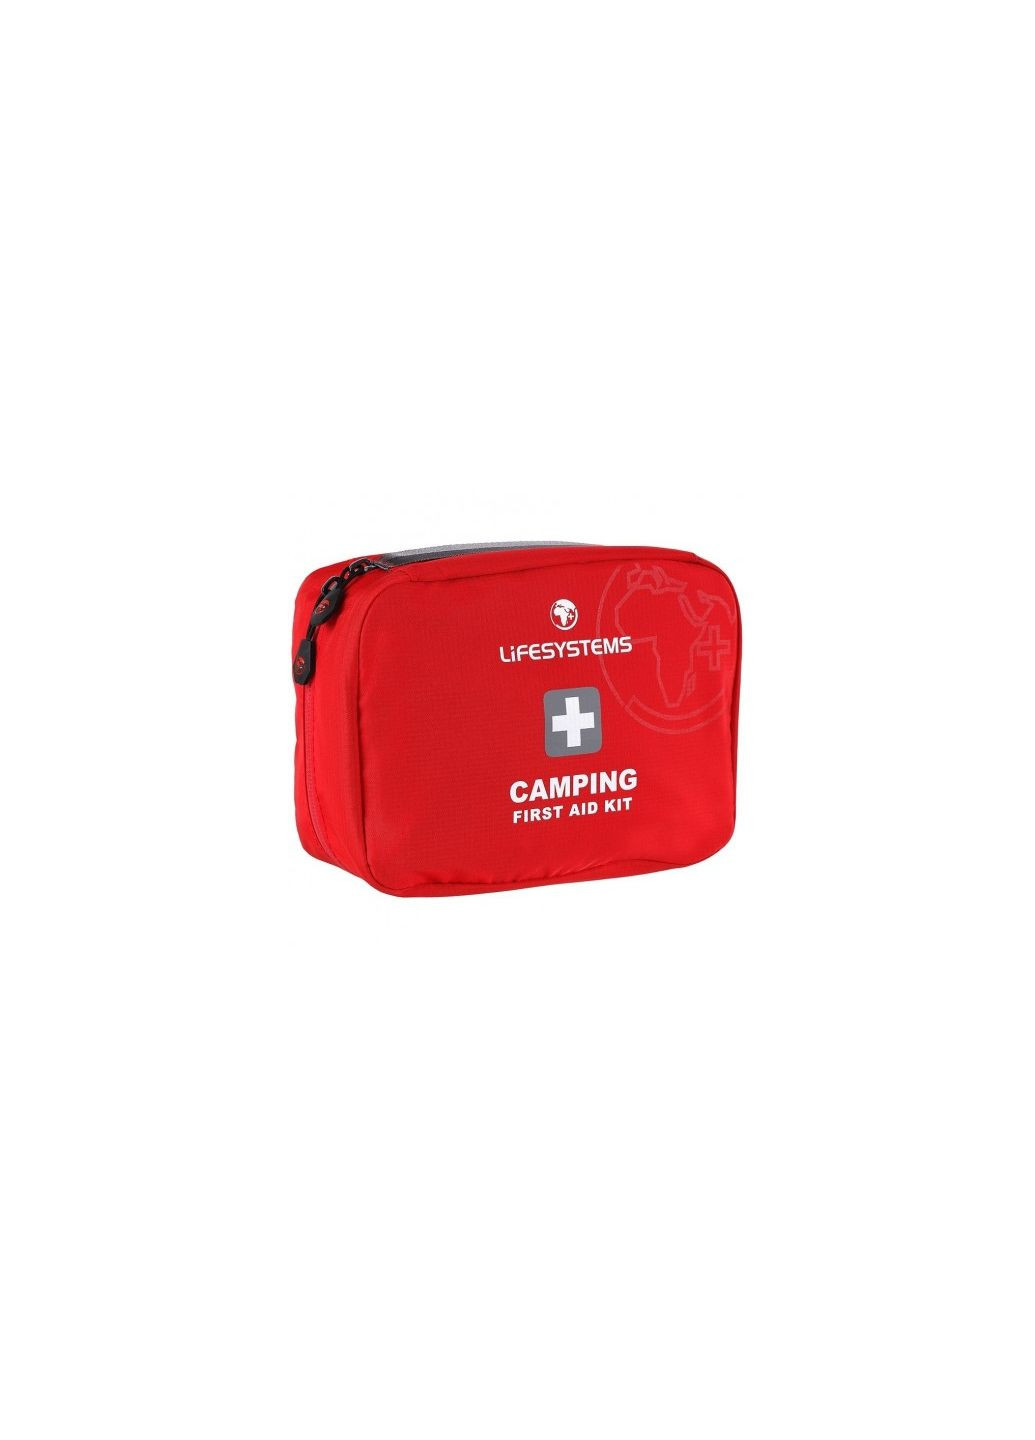 Аптечка Camping First Aid Kit Lifesystems (278003693)